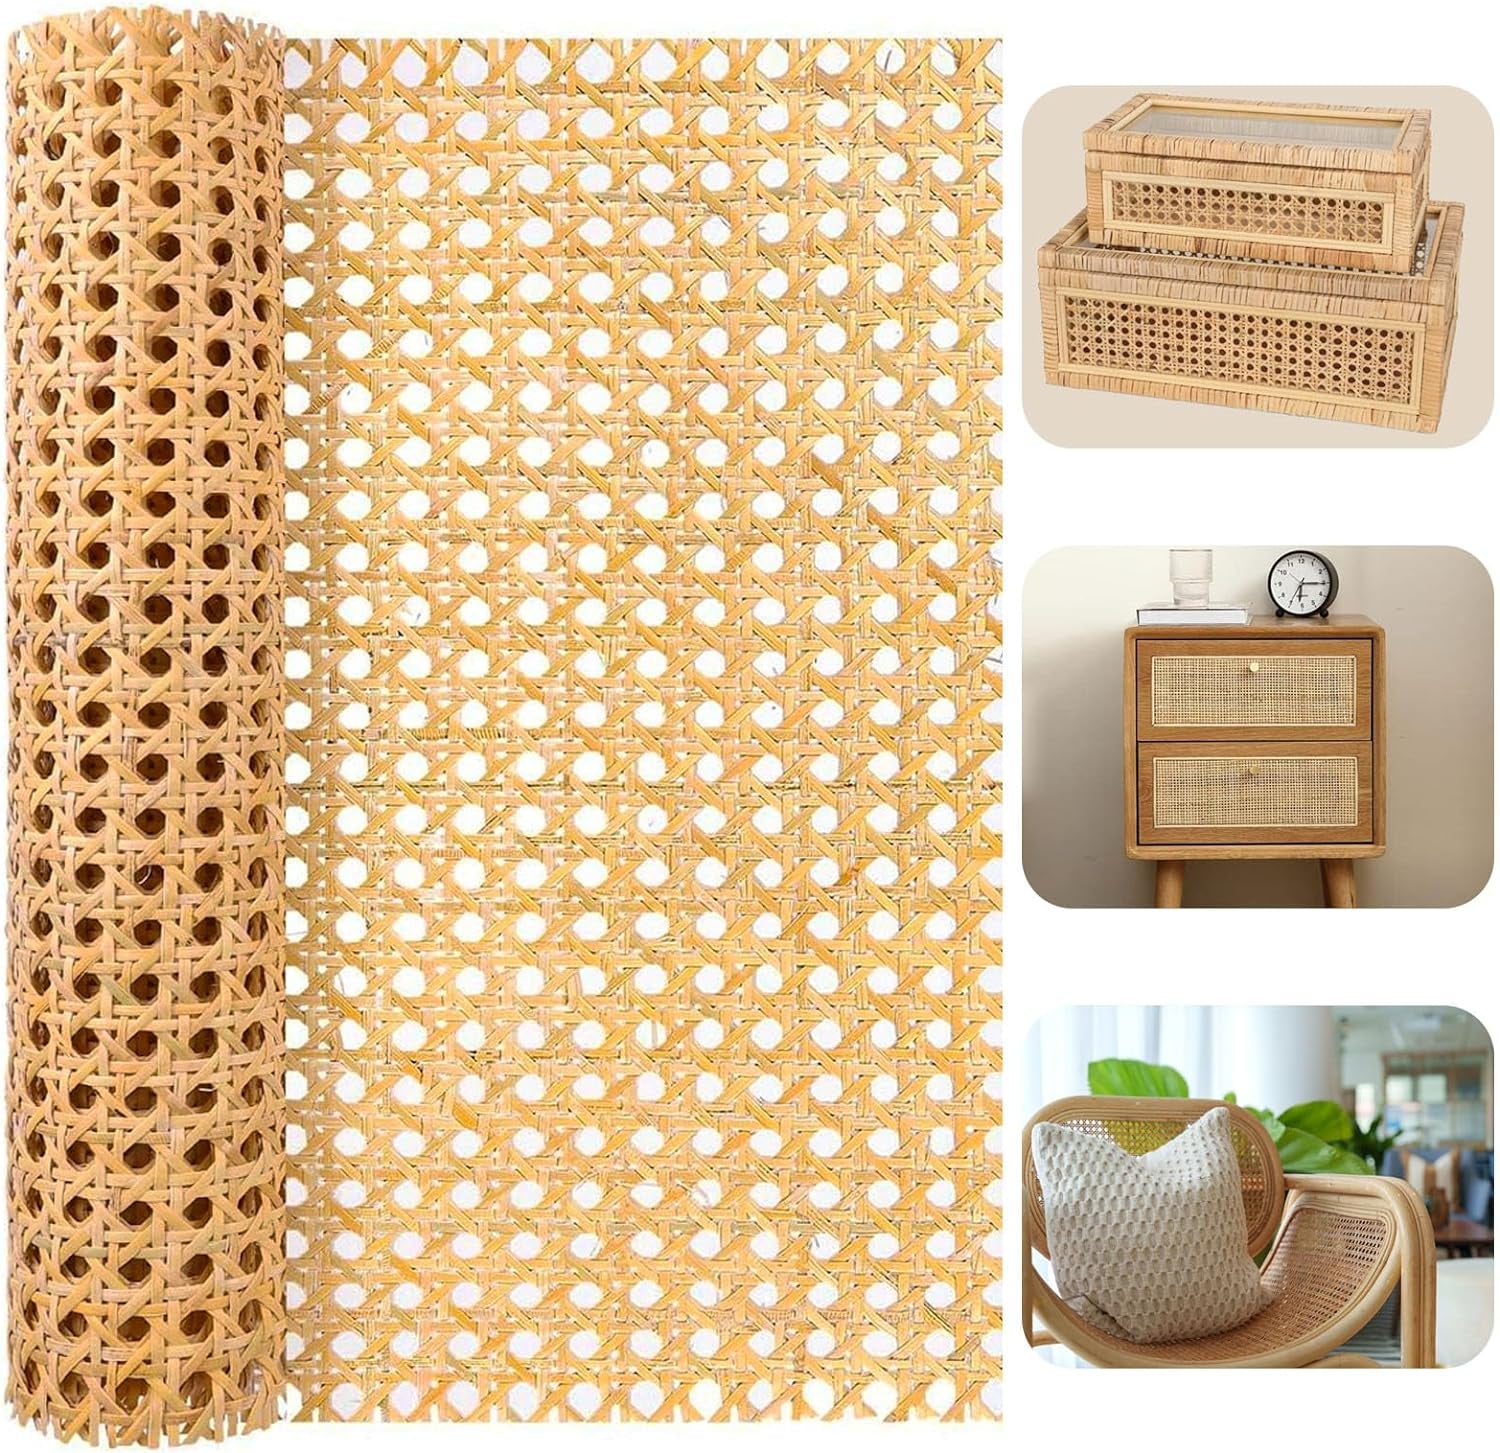 16-Inch Wide Natural Rattan Webbing 40-Inch Long (3.3 Ft.) Rattan Webbing Rolls for Furniture, Chairs, Cabinets, Ceilings, Beds Rattan Projects Basket Weaving Supplies Open Mesh Rattan